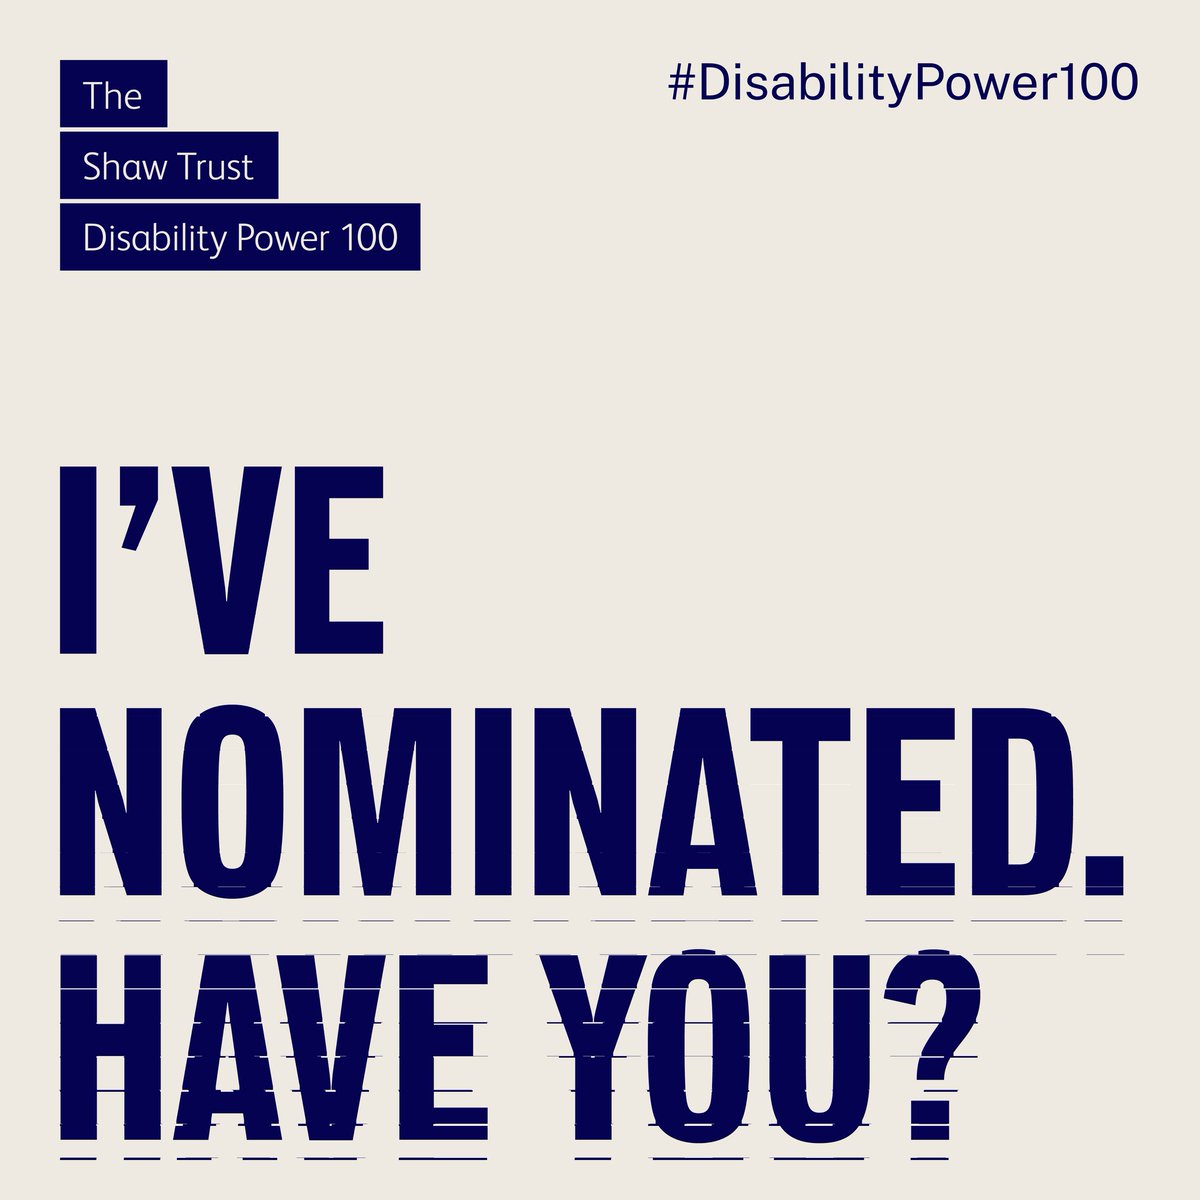 Being in the #disabilitypower100 for a few years on the trot, including the dizzy heights of 3rd place, catapulted my work in to new places. The impact it lead to is immeasurable and invaluable to disability inclusion. I've just nominated a change maker for this year. Have you?